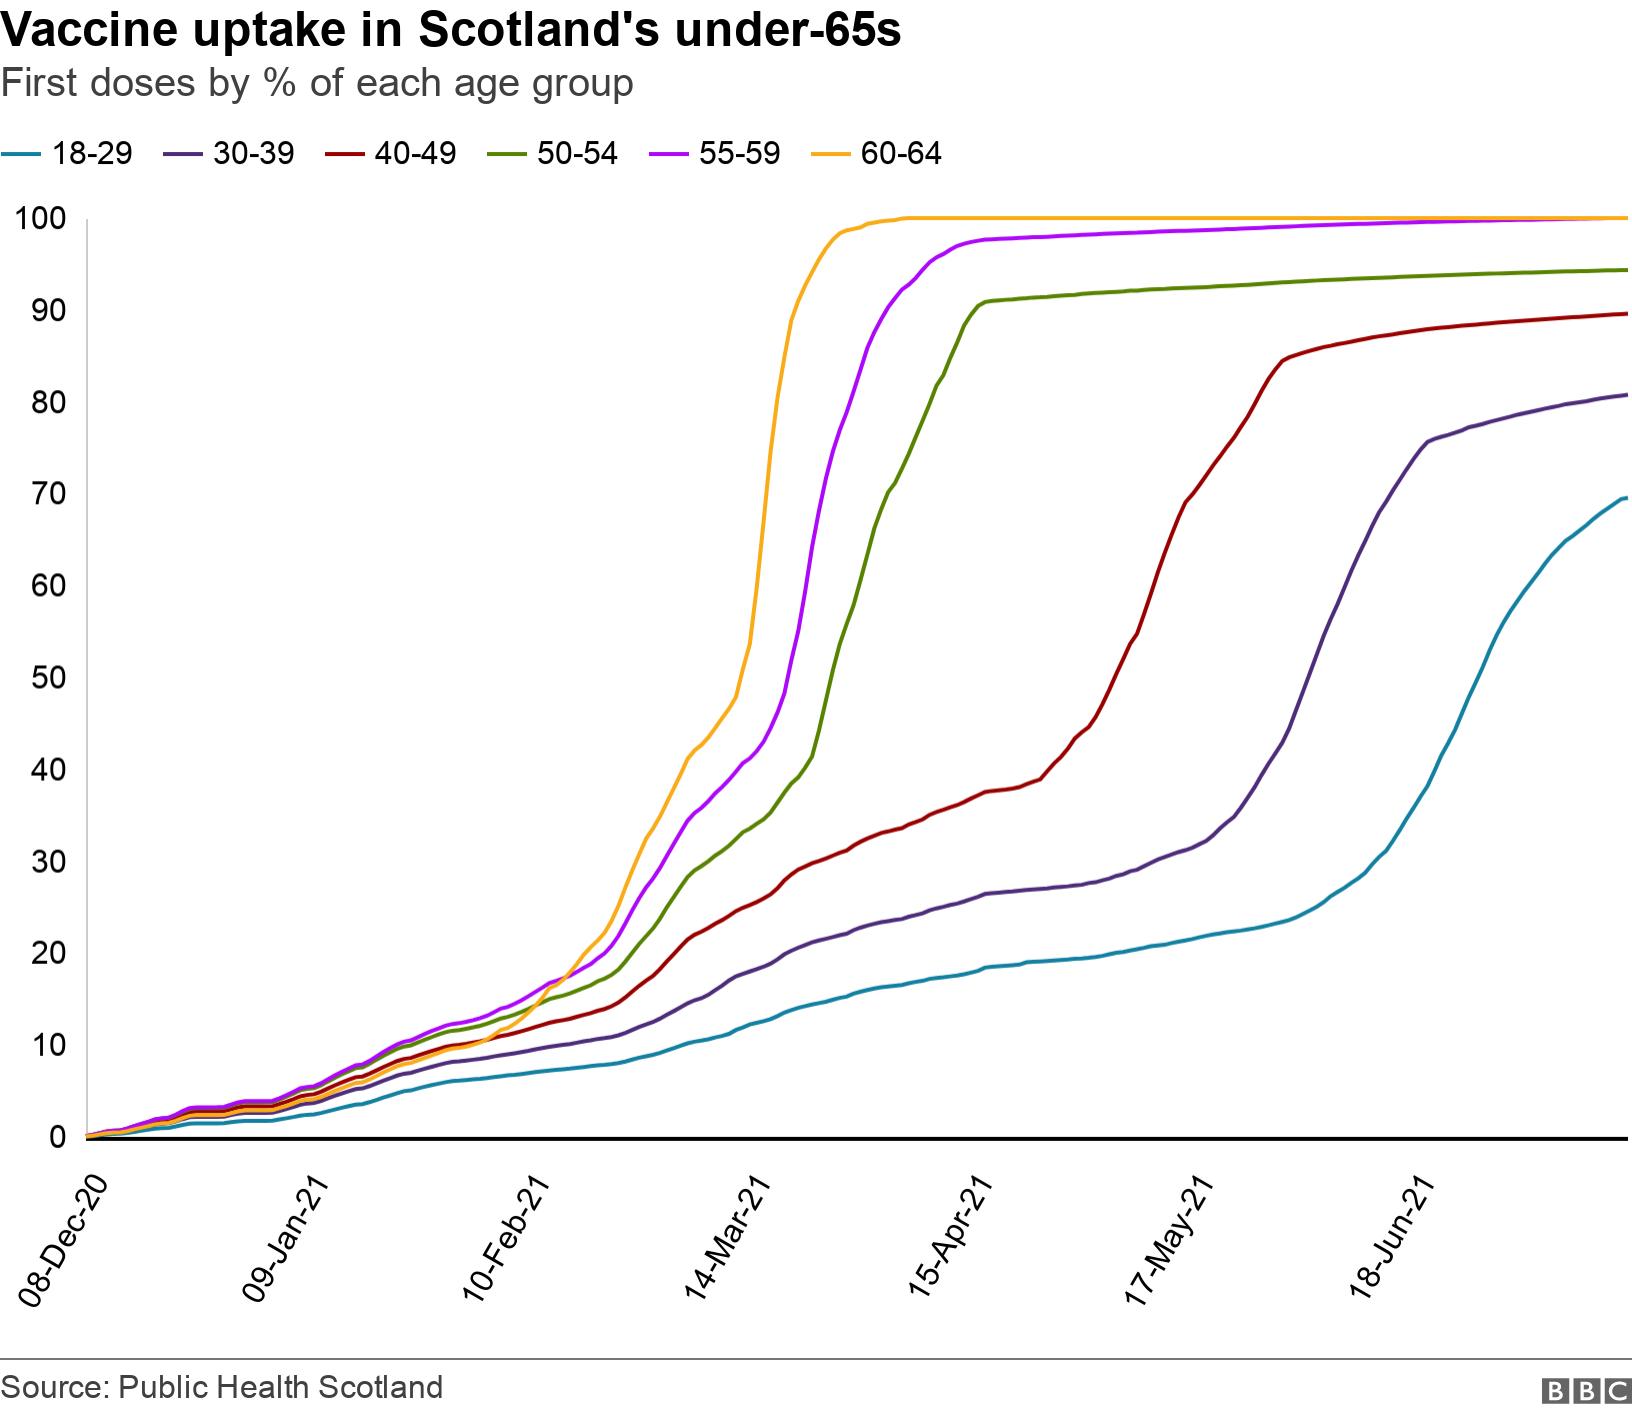 Vaccine uptake in Scotland's under-65s. First doses by % of each age group. About 95% of the 55 to 59-year-old cohort had been given a first jab before the take-up rate began to level off. In 50-54s it was about 90%.
In 40 to 49-year-olds the graph began to level off at 85%, and in 30 to 39-year olds it was at 75%. Each group has since added another five percentage points to its total. The line for 18-29 year-olds has not yet levelled off, but appears to be slowing somewhat at around 70%. .